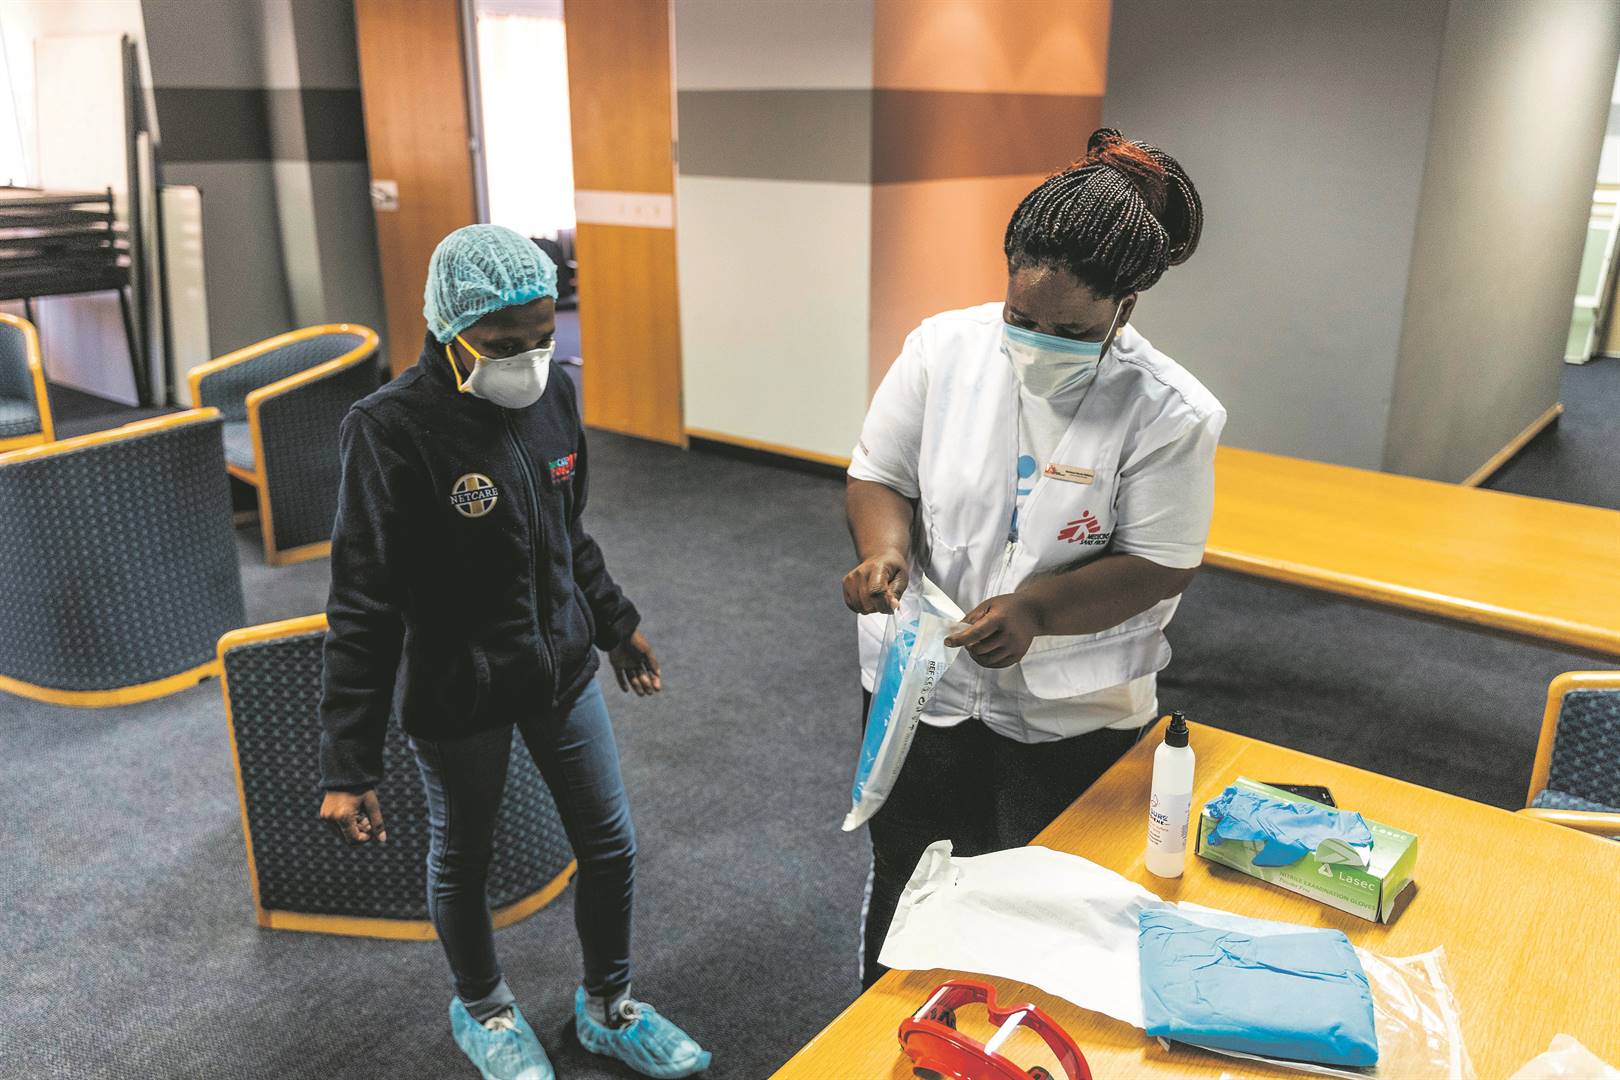 Bhelekazi Mdlalose (right) is a forensic nurse who has been educating people about the spread of Covid-19 in communities